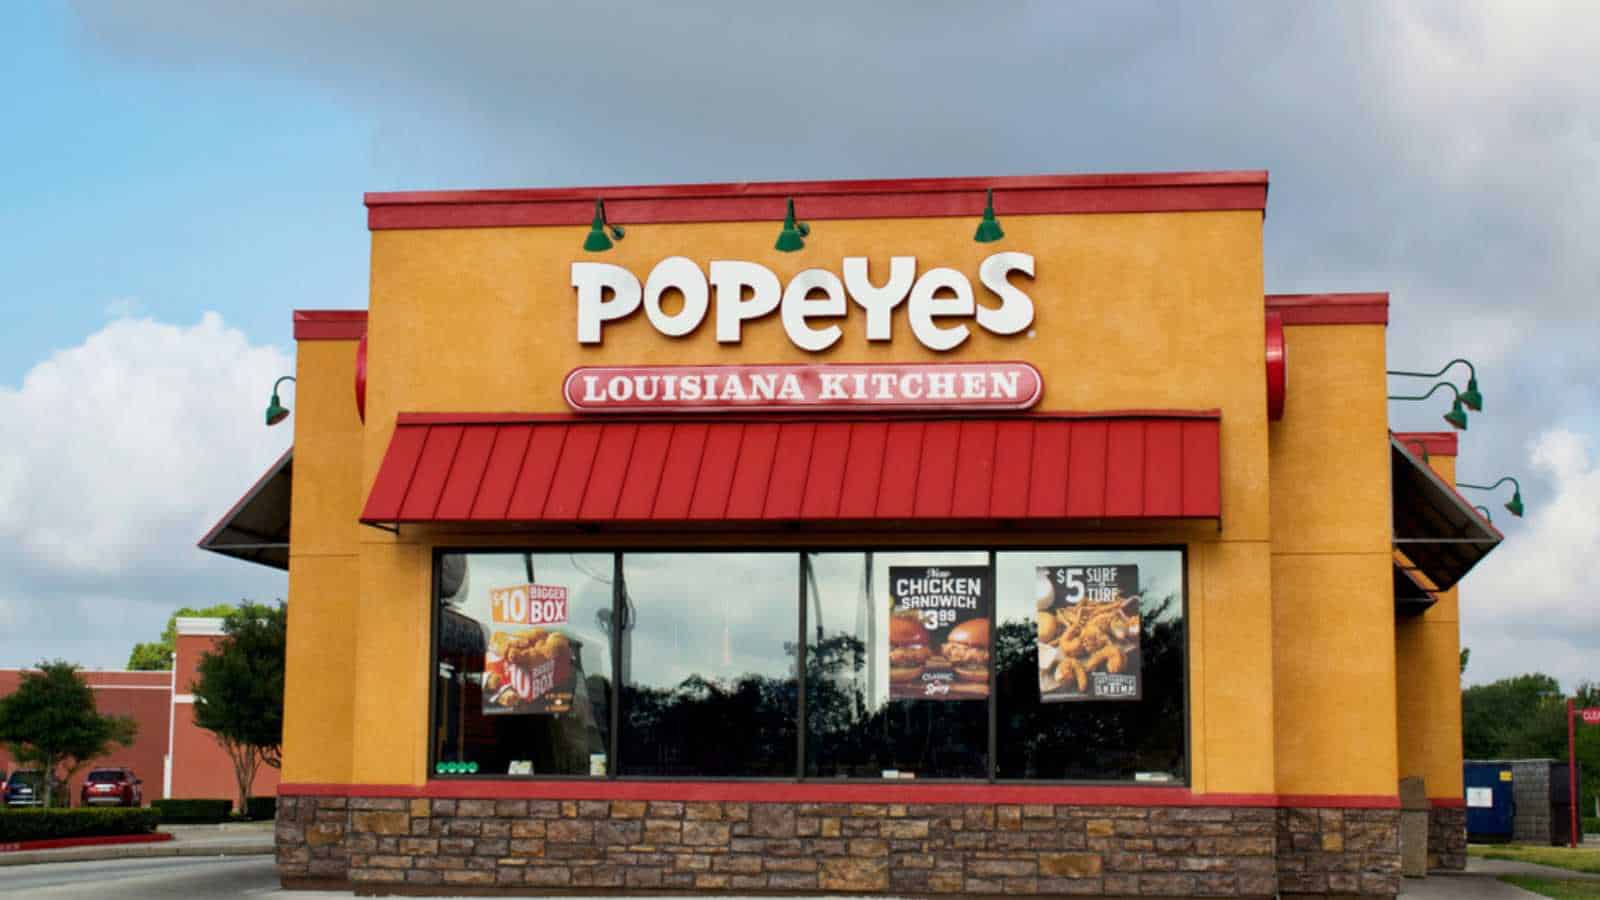 Houston, Texas USA 08-14-2019: Popeye's fried chicken storefront in Houston, TX. Popular Southern fast food restaurant founded in 1972.
